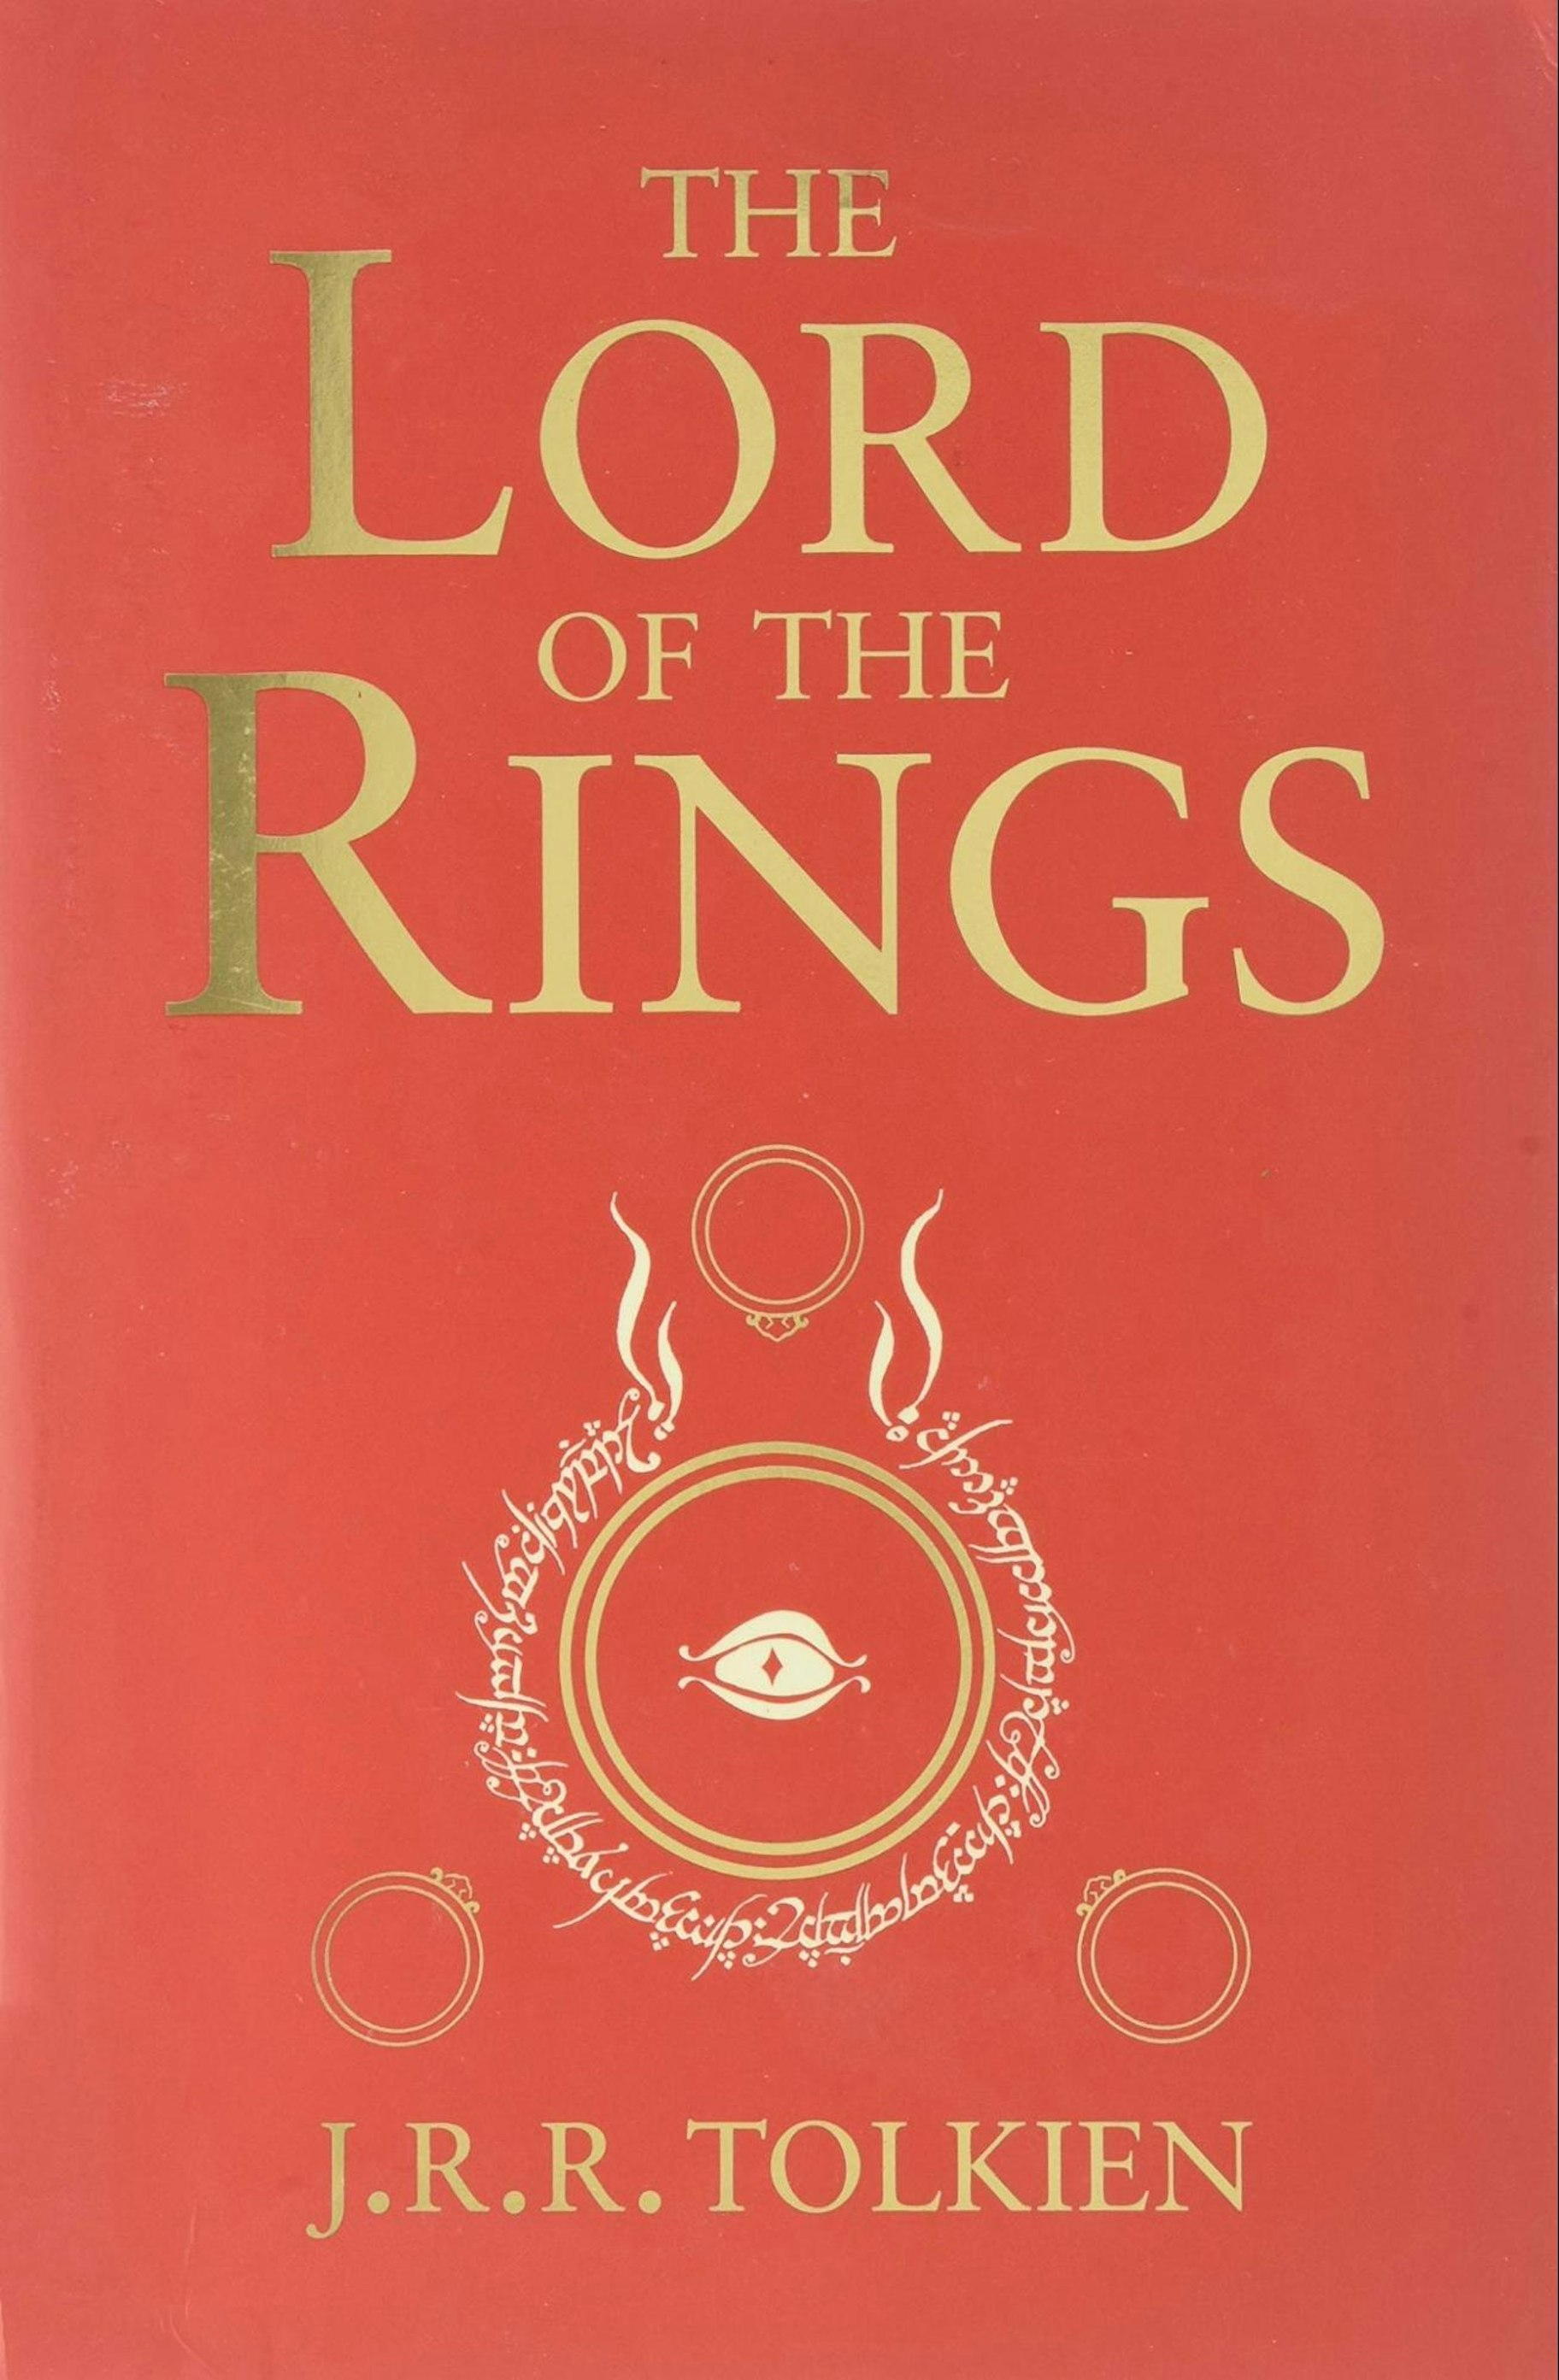 The Lord of the Rings - J.R.R.Tolkien